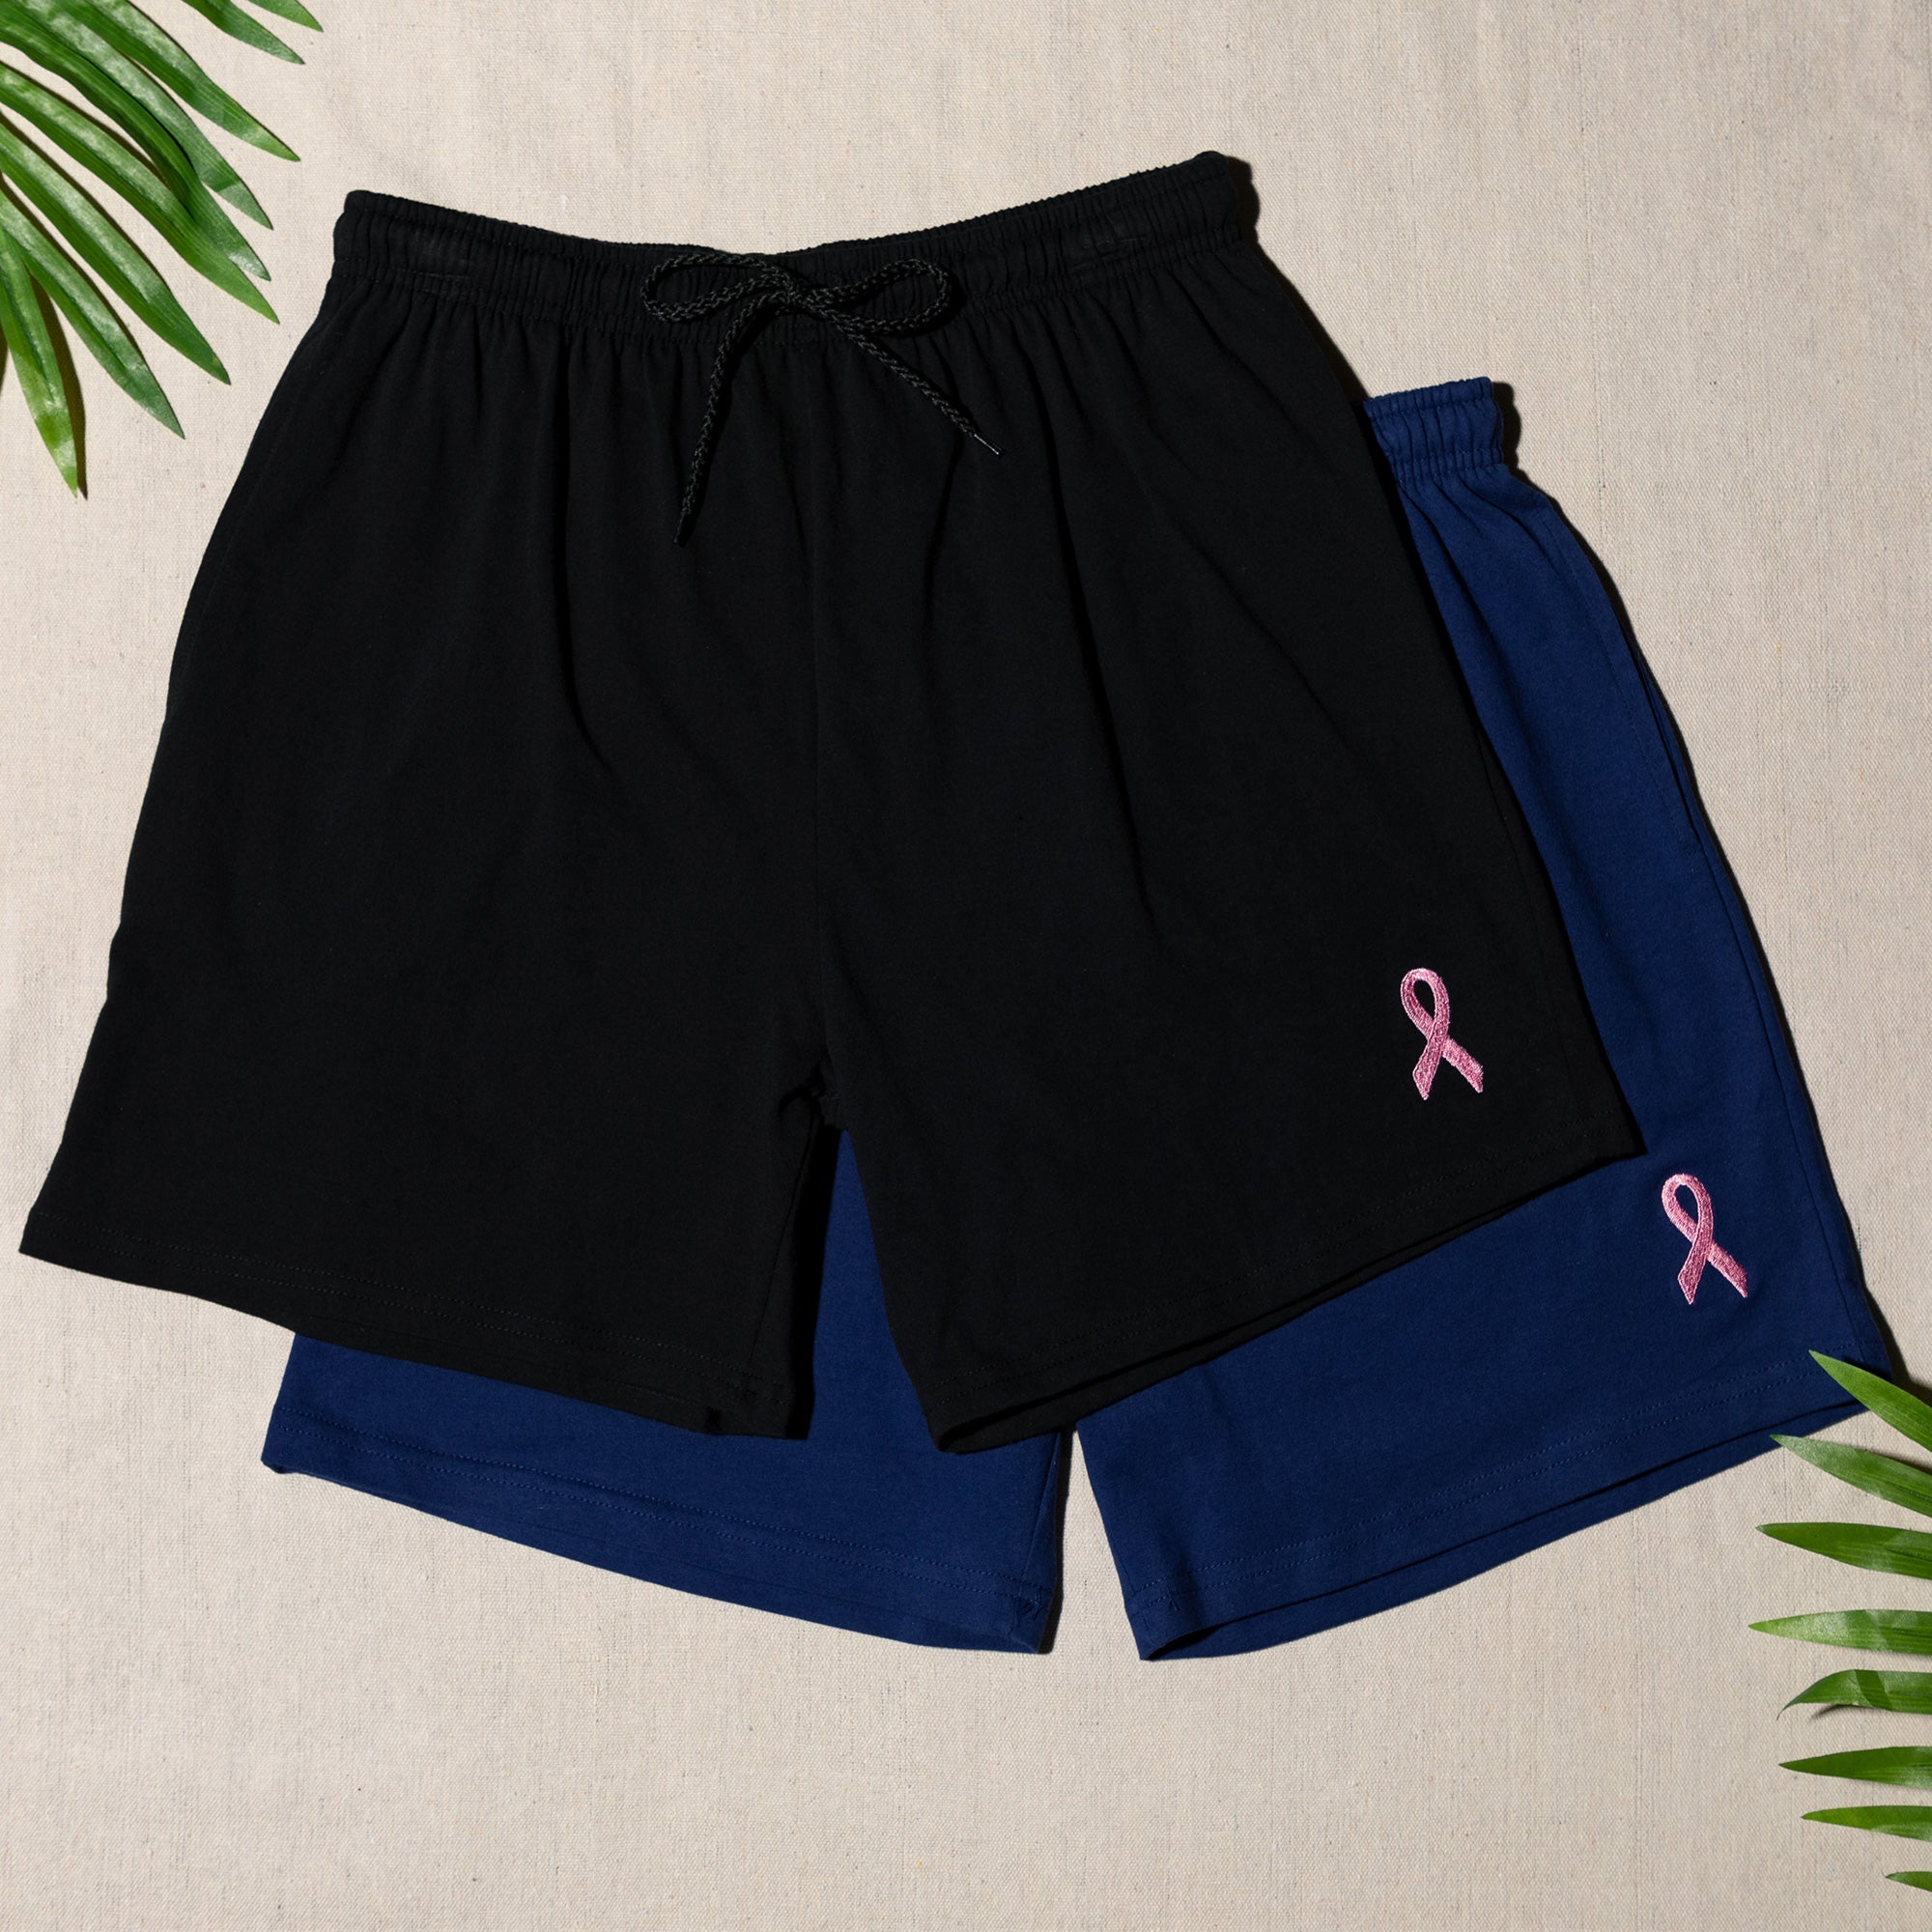 Pink Ribbon Casual Shorts For Women , Breast Cancer Shorts - Navy - 4X